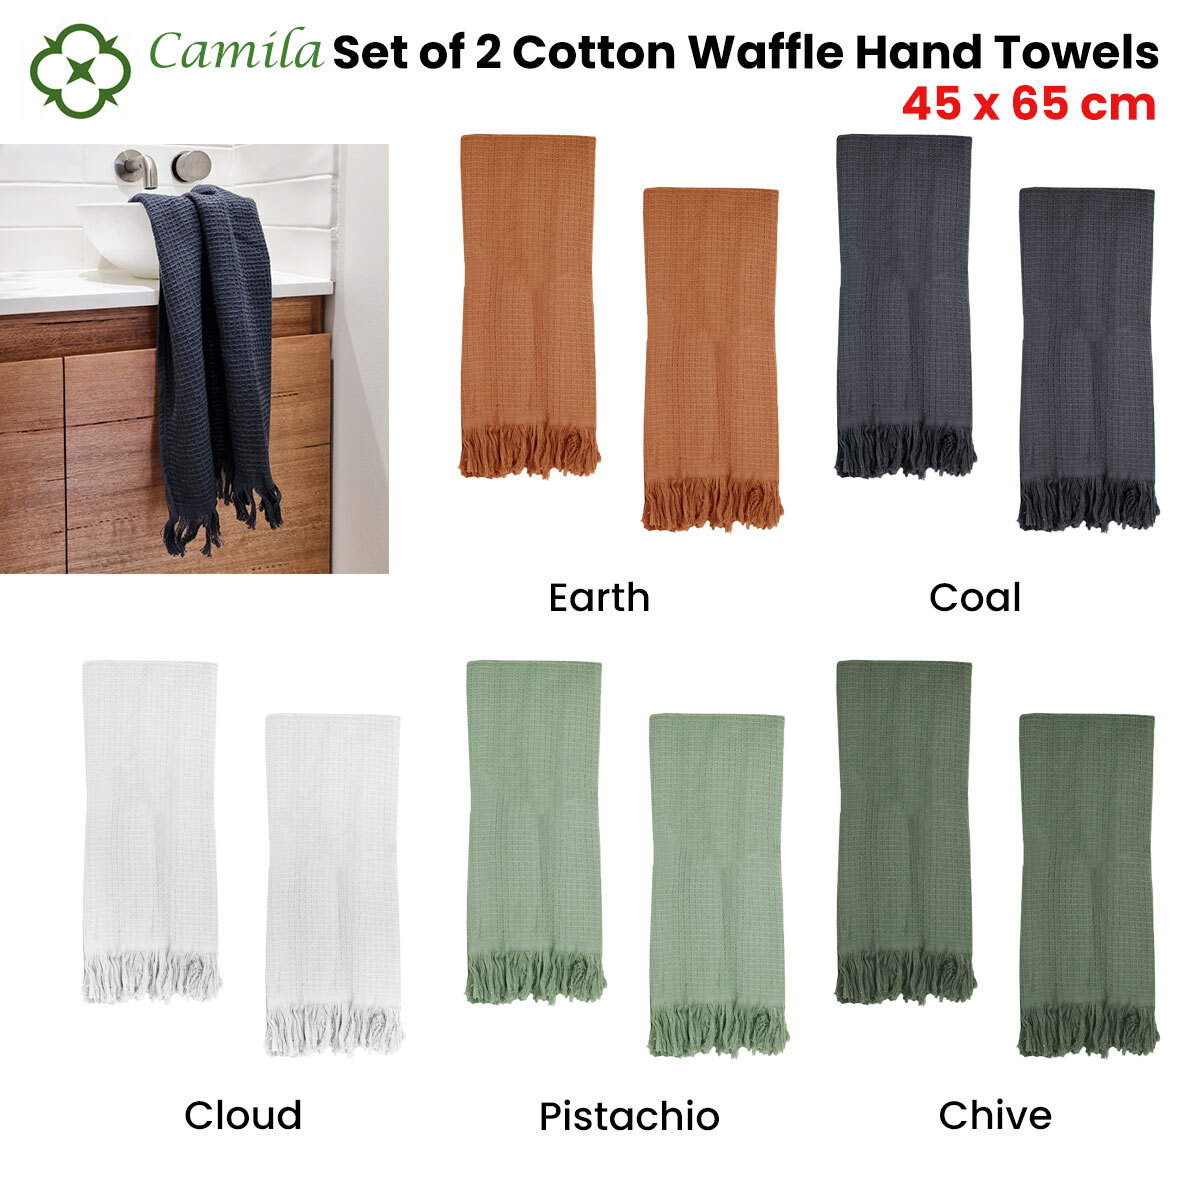 J Elliot Home 400GSM Camila Set of 2 Cotton Waffle Hand Towels 45 x 65 cm Chive